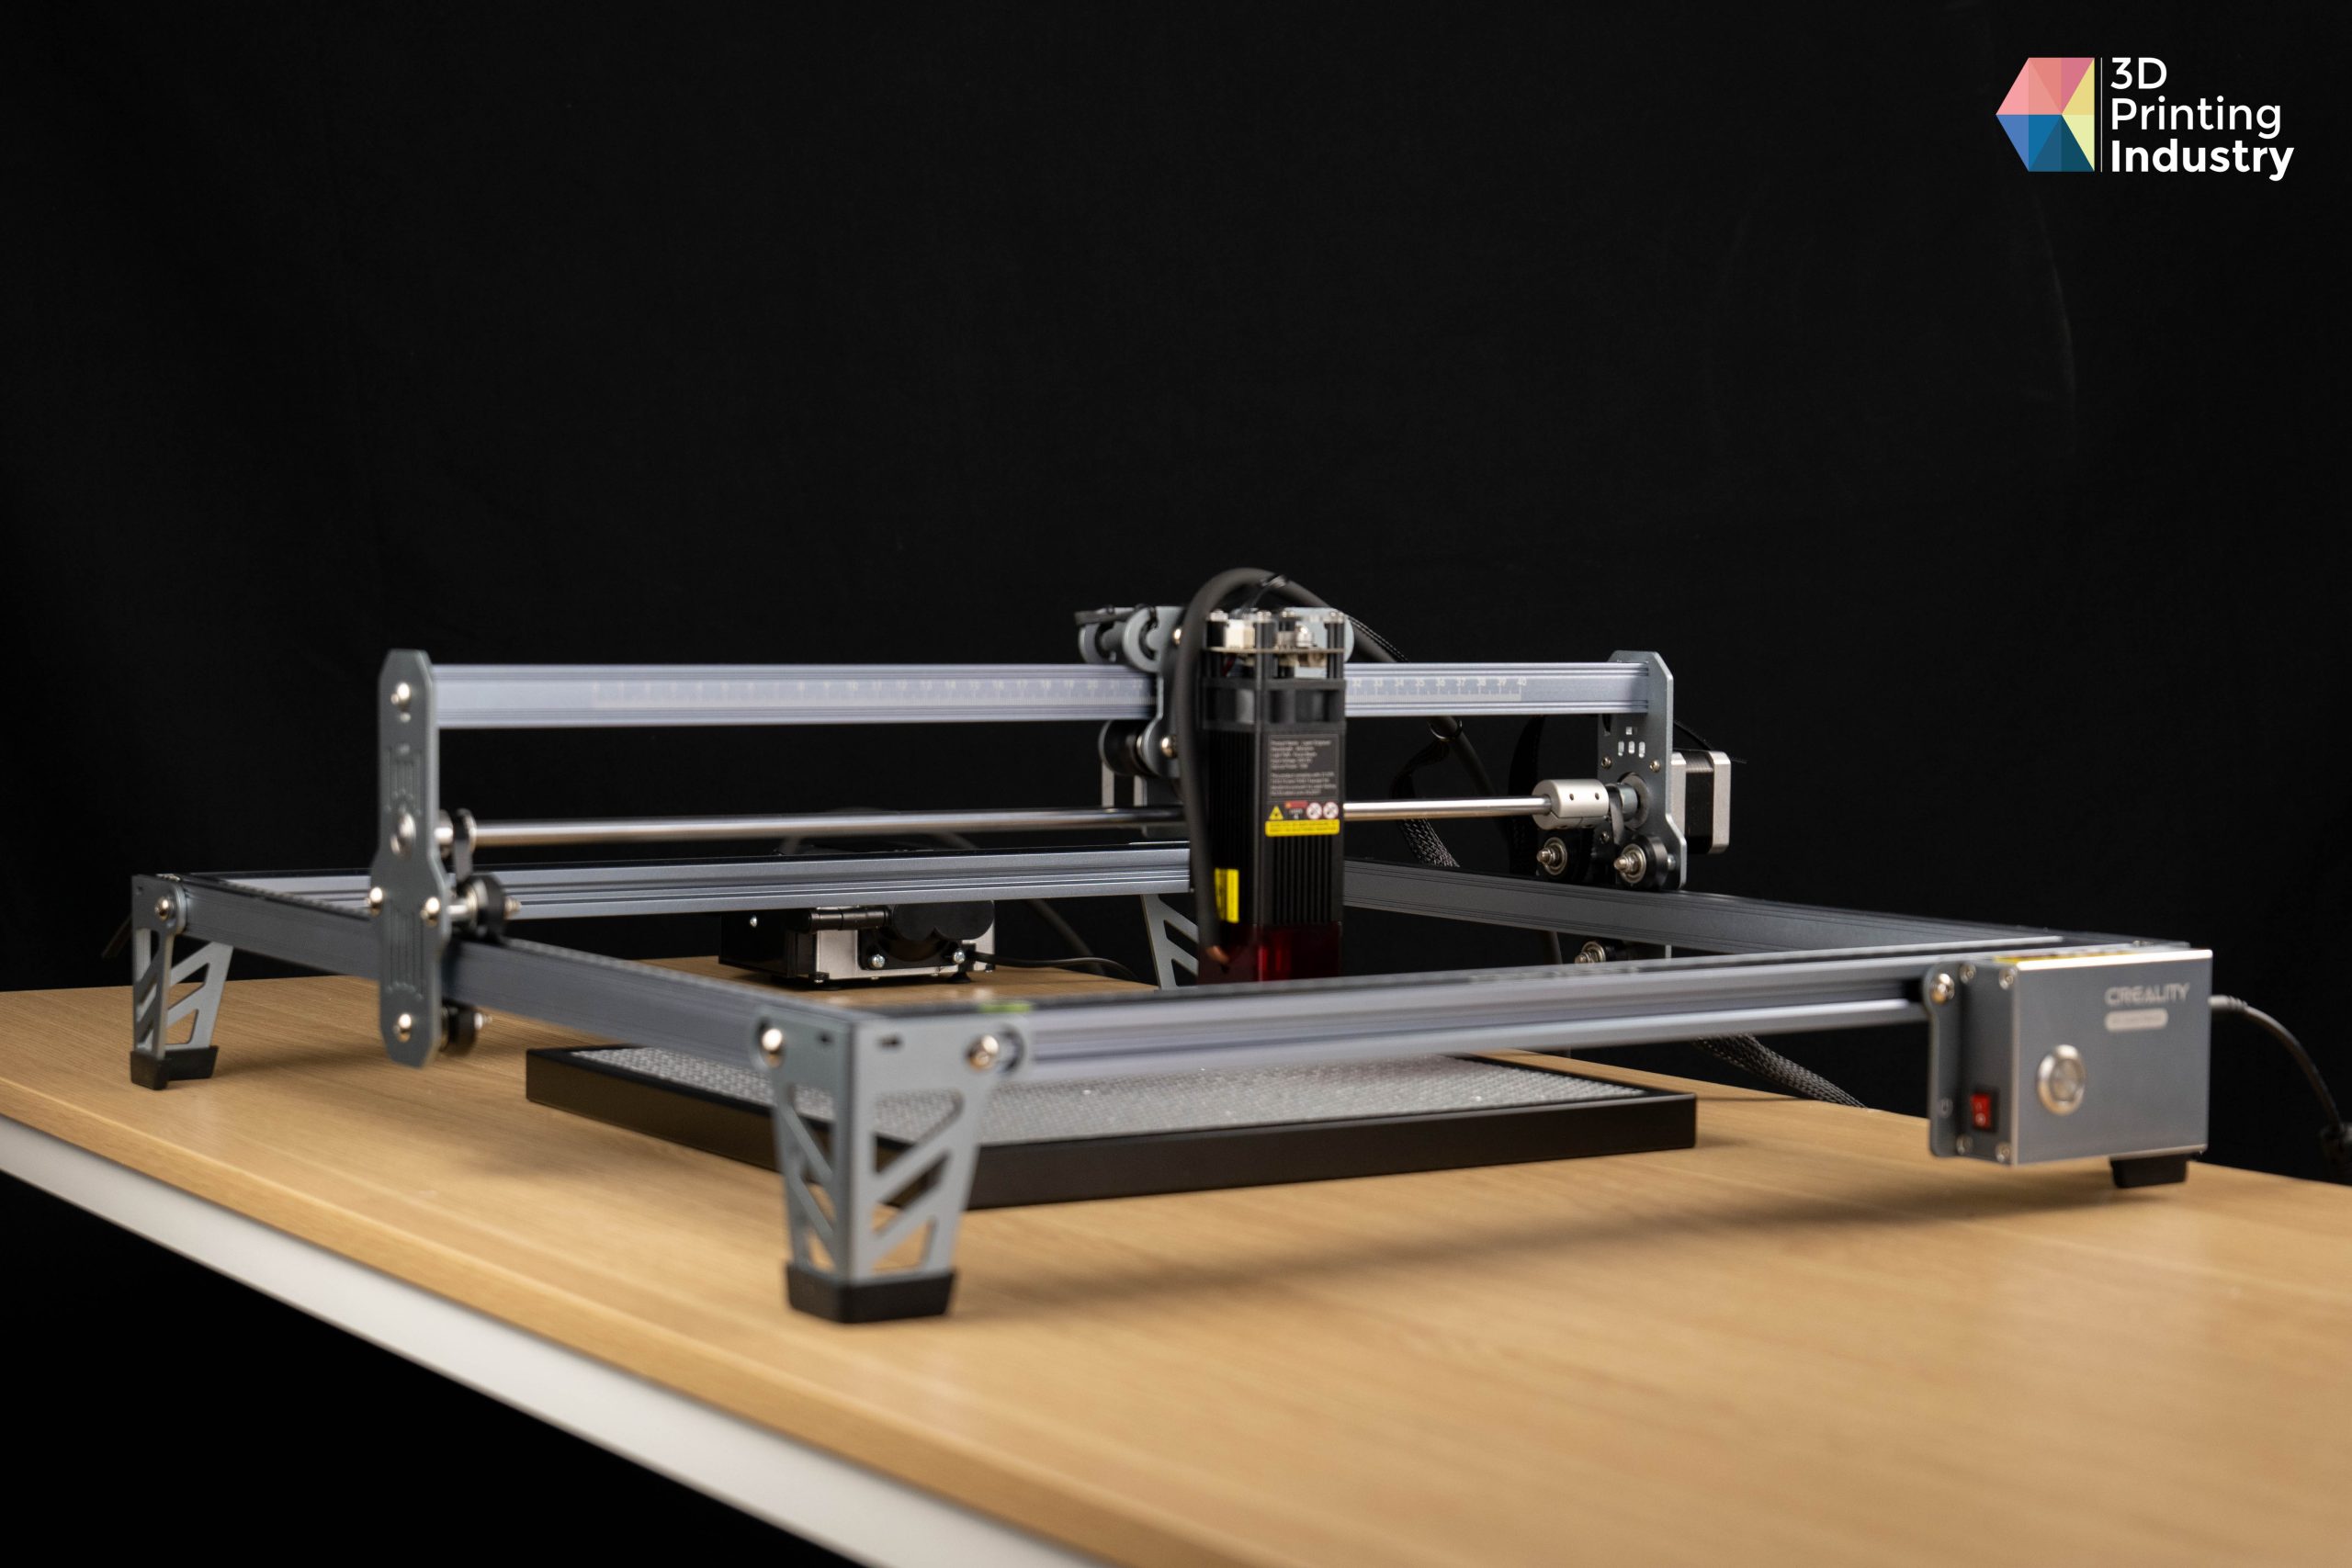 Creality 5w Laser Module - Turn your 3D Printer into a Laser Engraver 